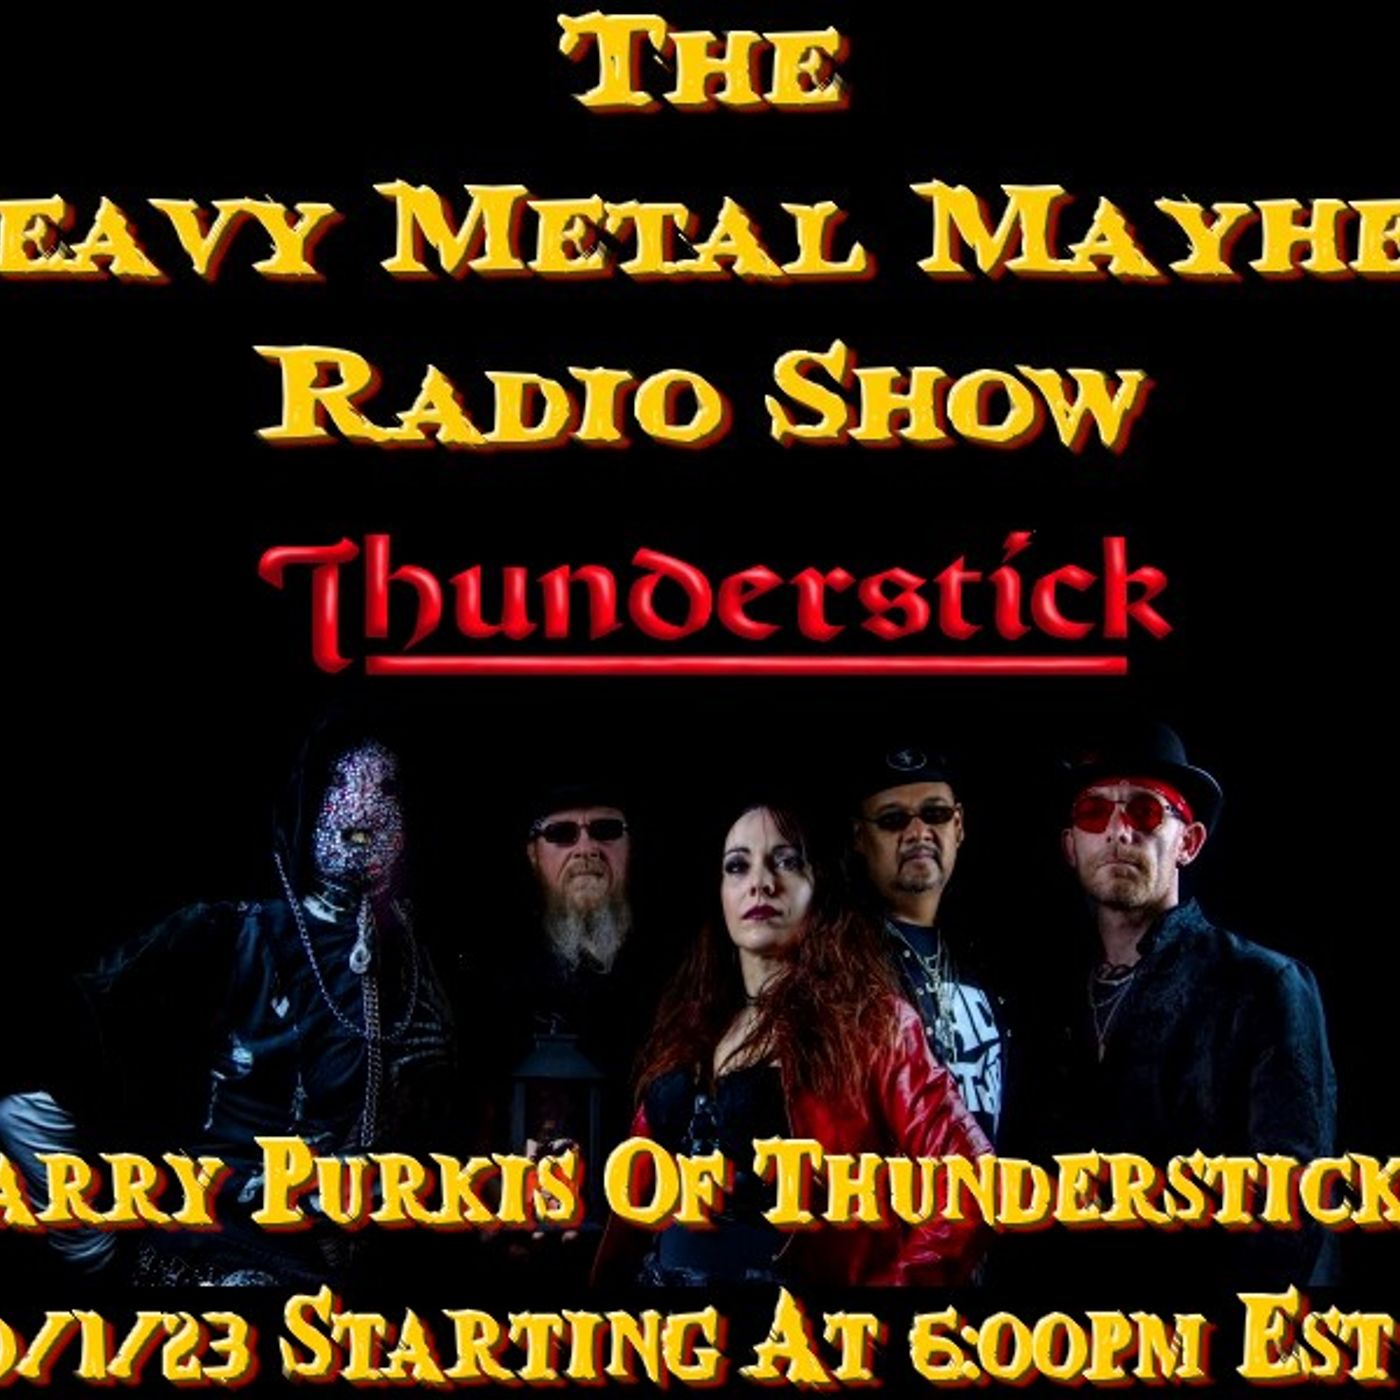 Guest Barry Purkis Of Thunderstick 10/1/23